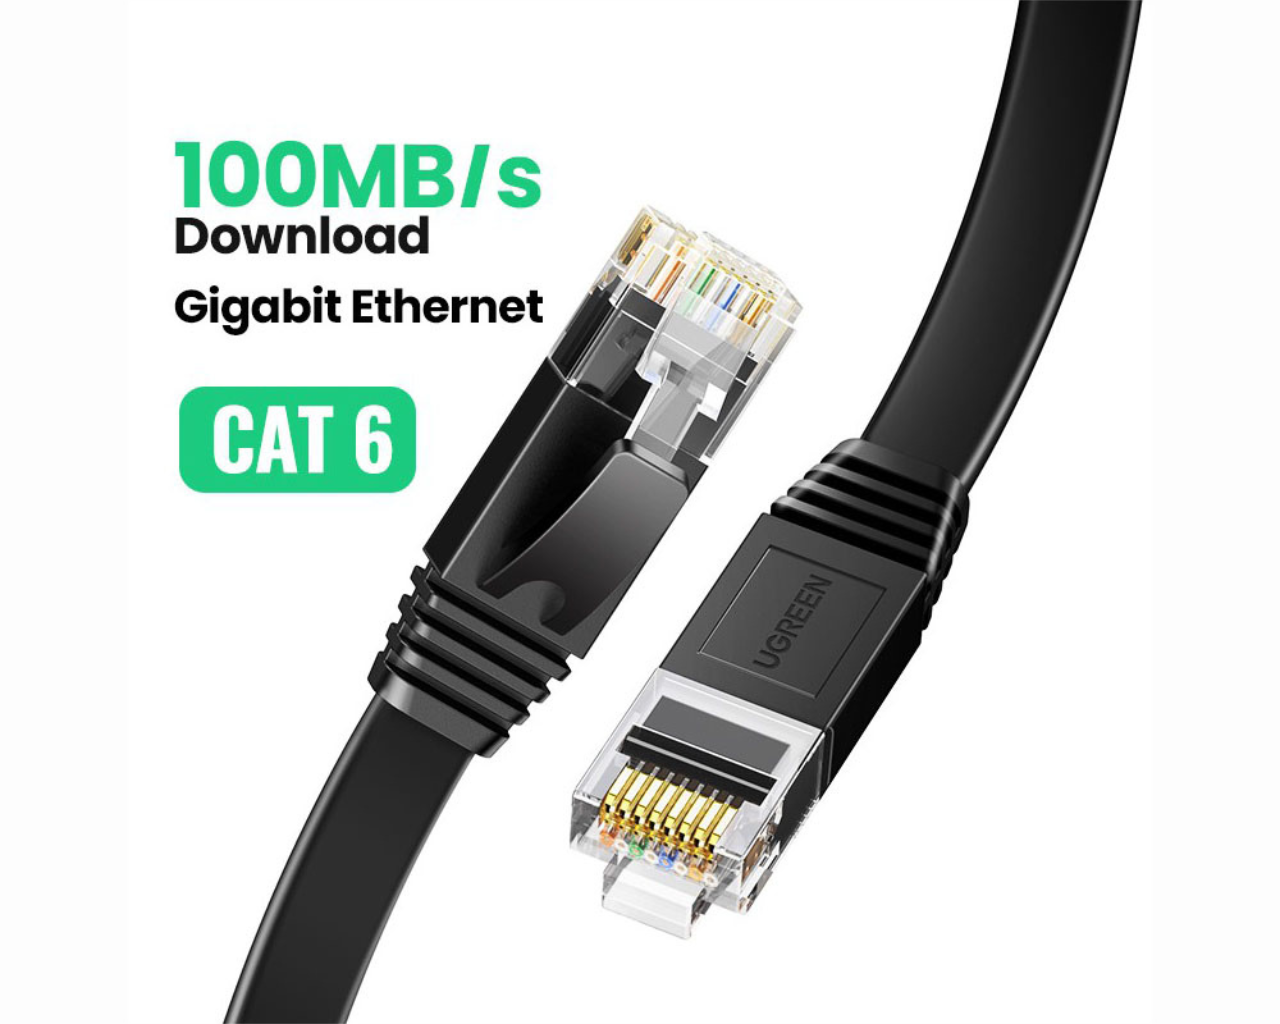 Ugreen Cable Ethernet CAT6 3M